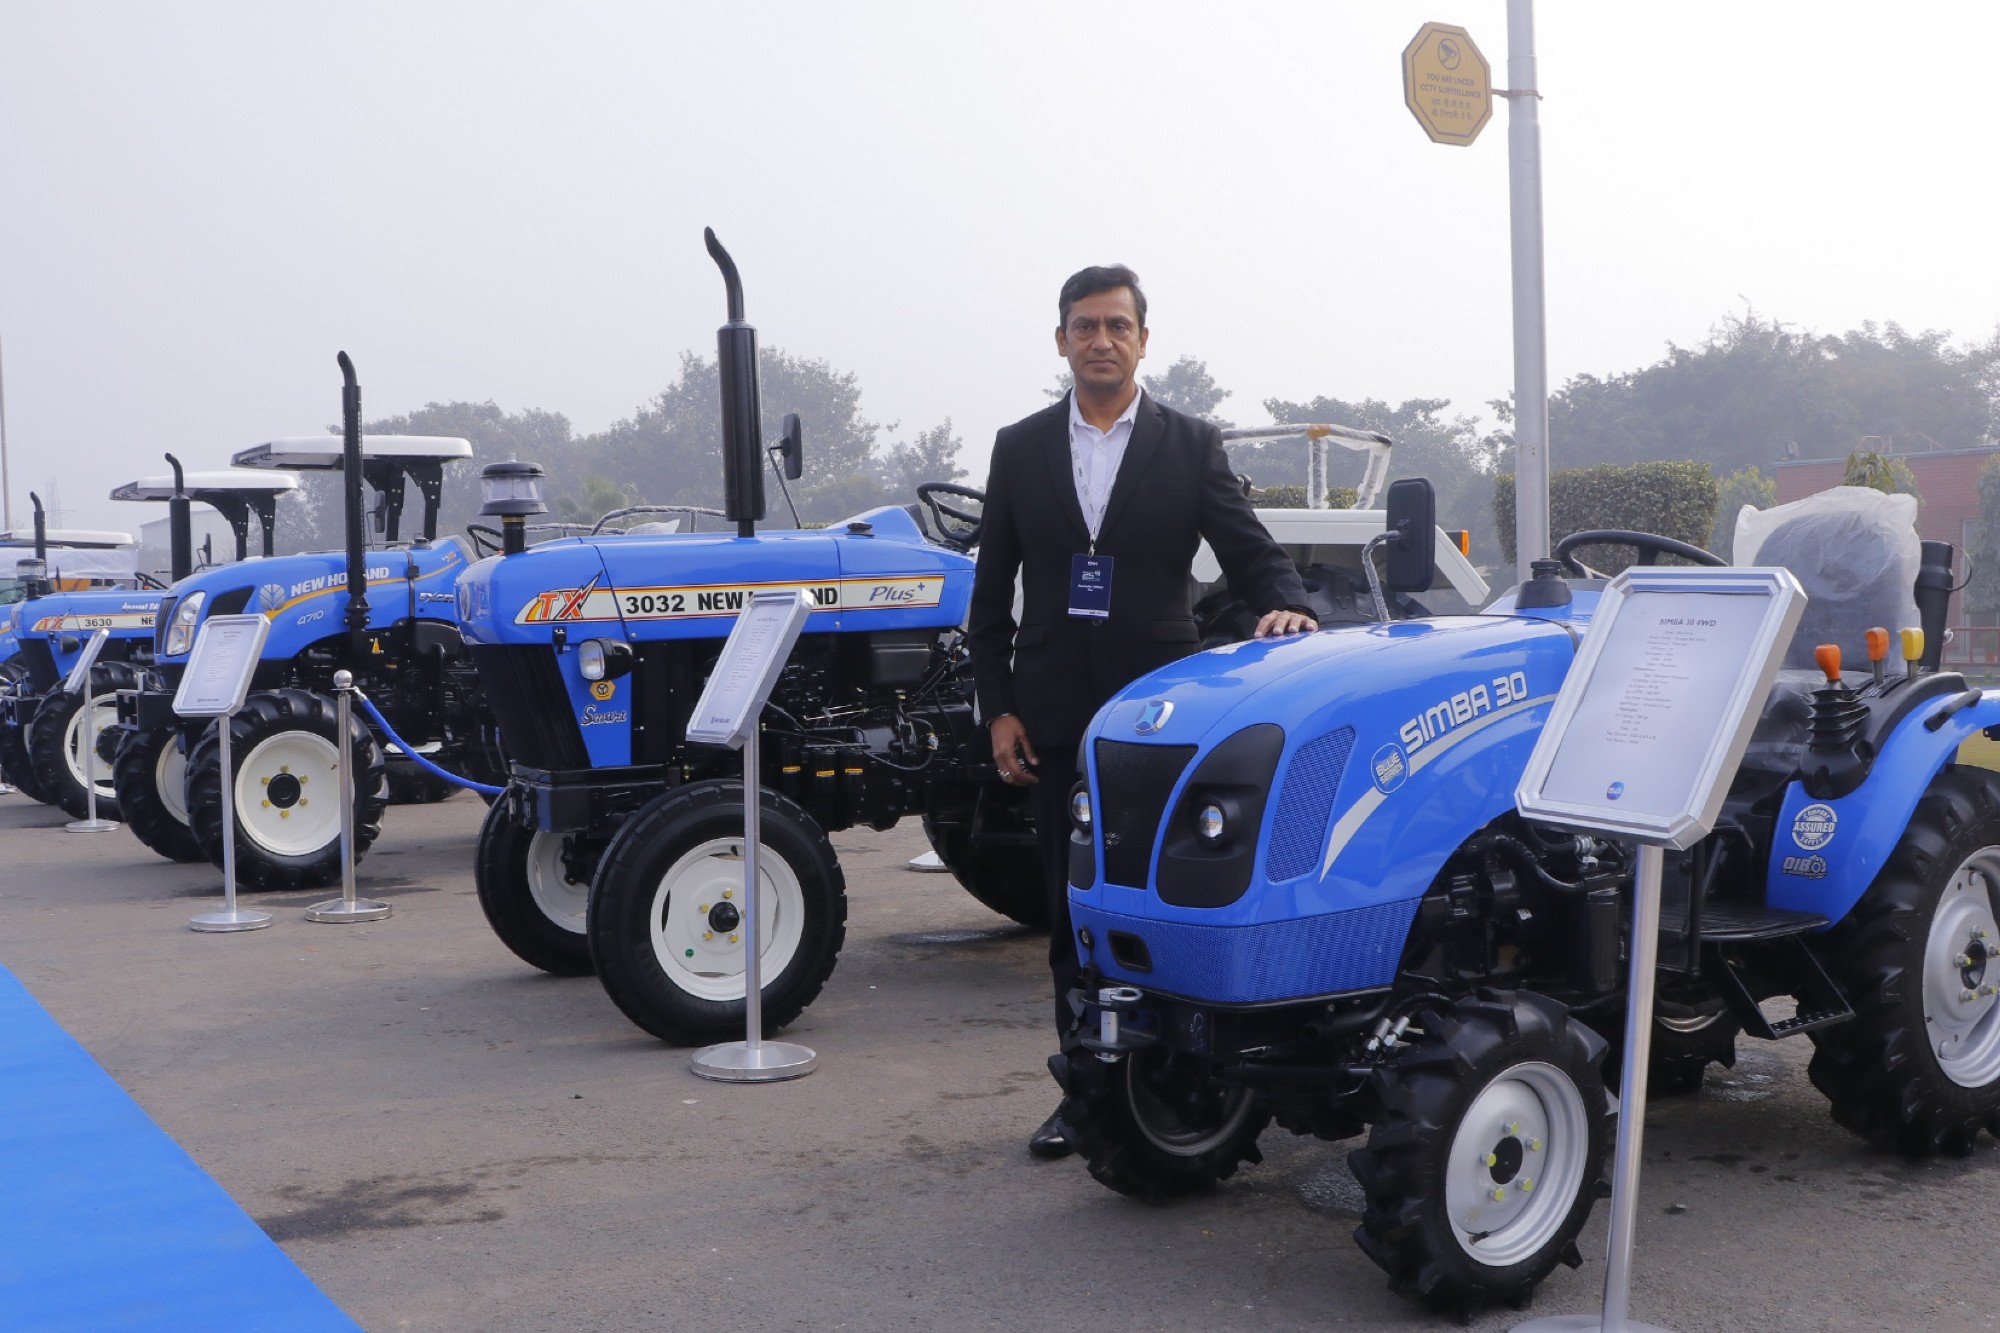 CNH, a global leader in agricultural and construction solutions, joyously marks the 25th anniversary of its esteemed brand, New Holland, in India.